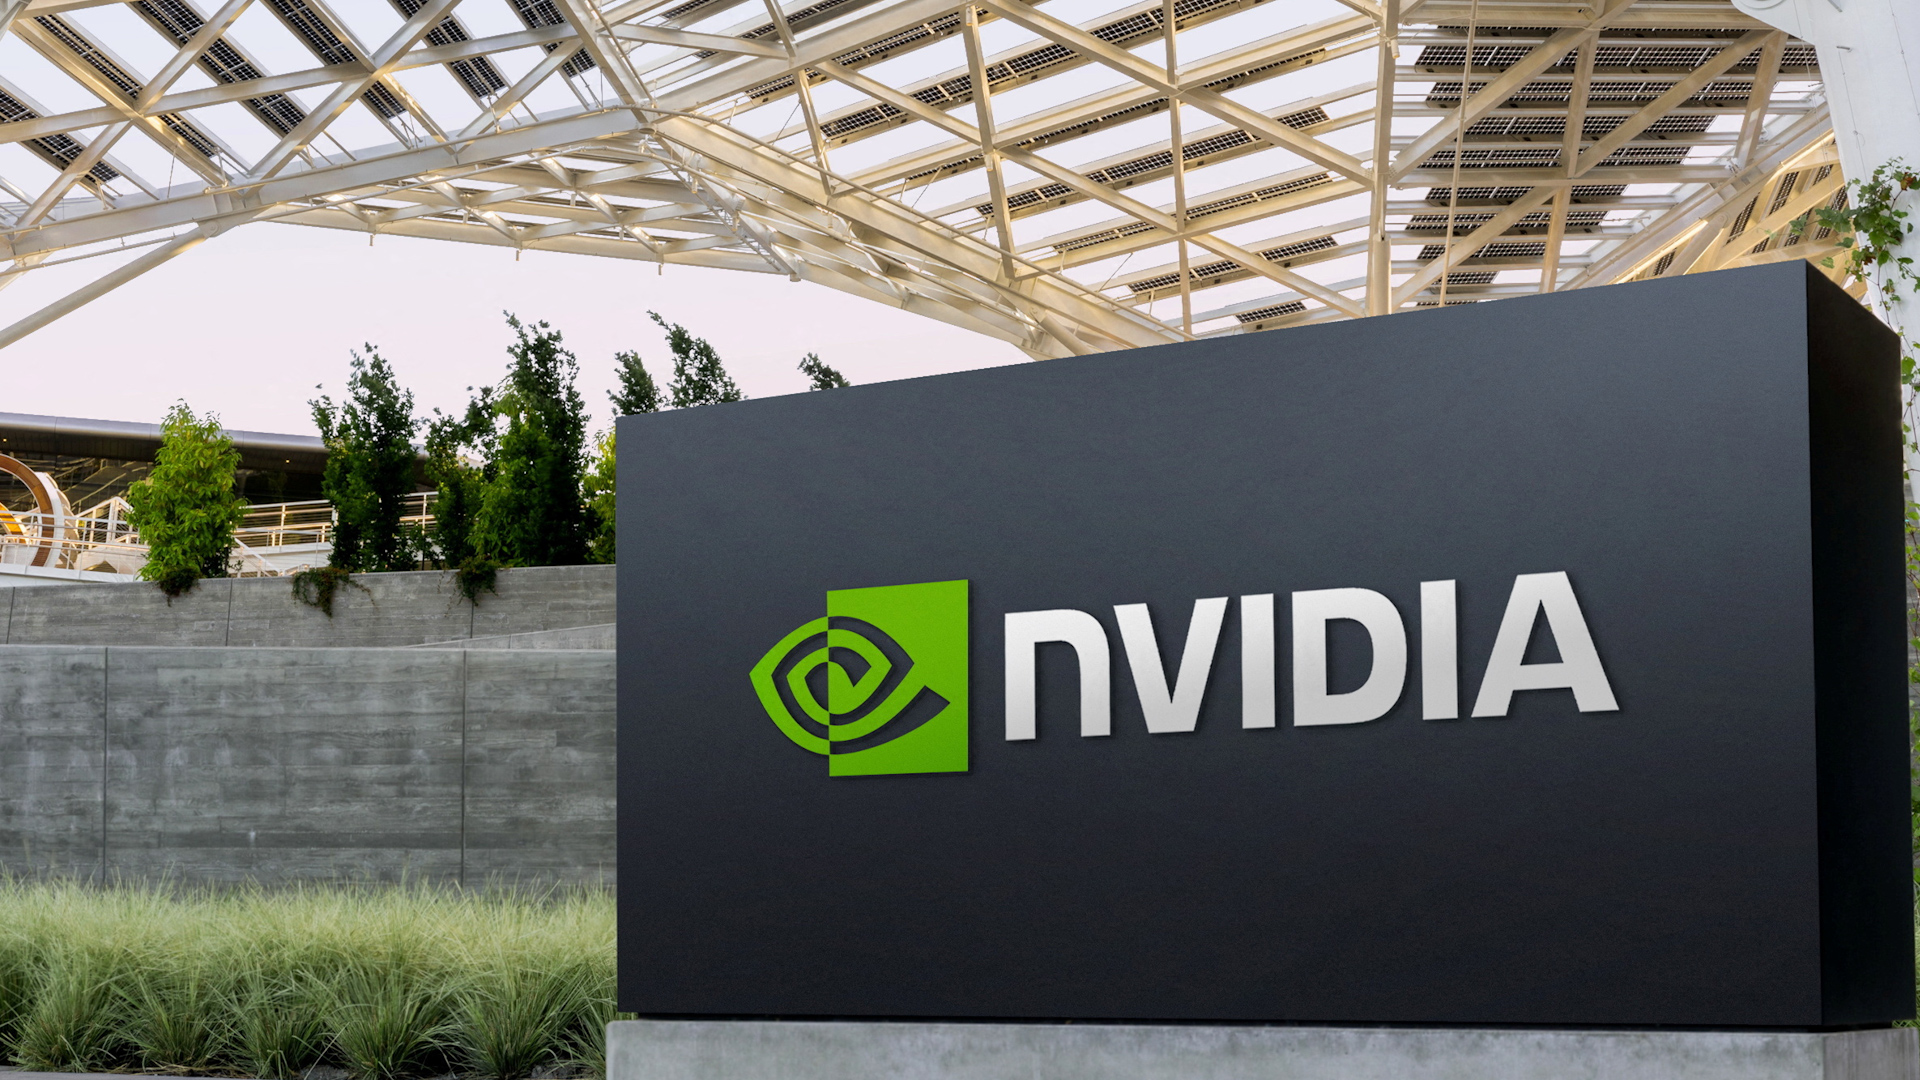 Video game characters can react to your speech with Nvidia’s new AI technology